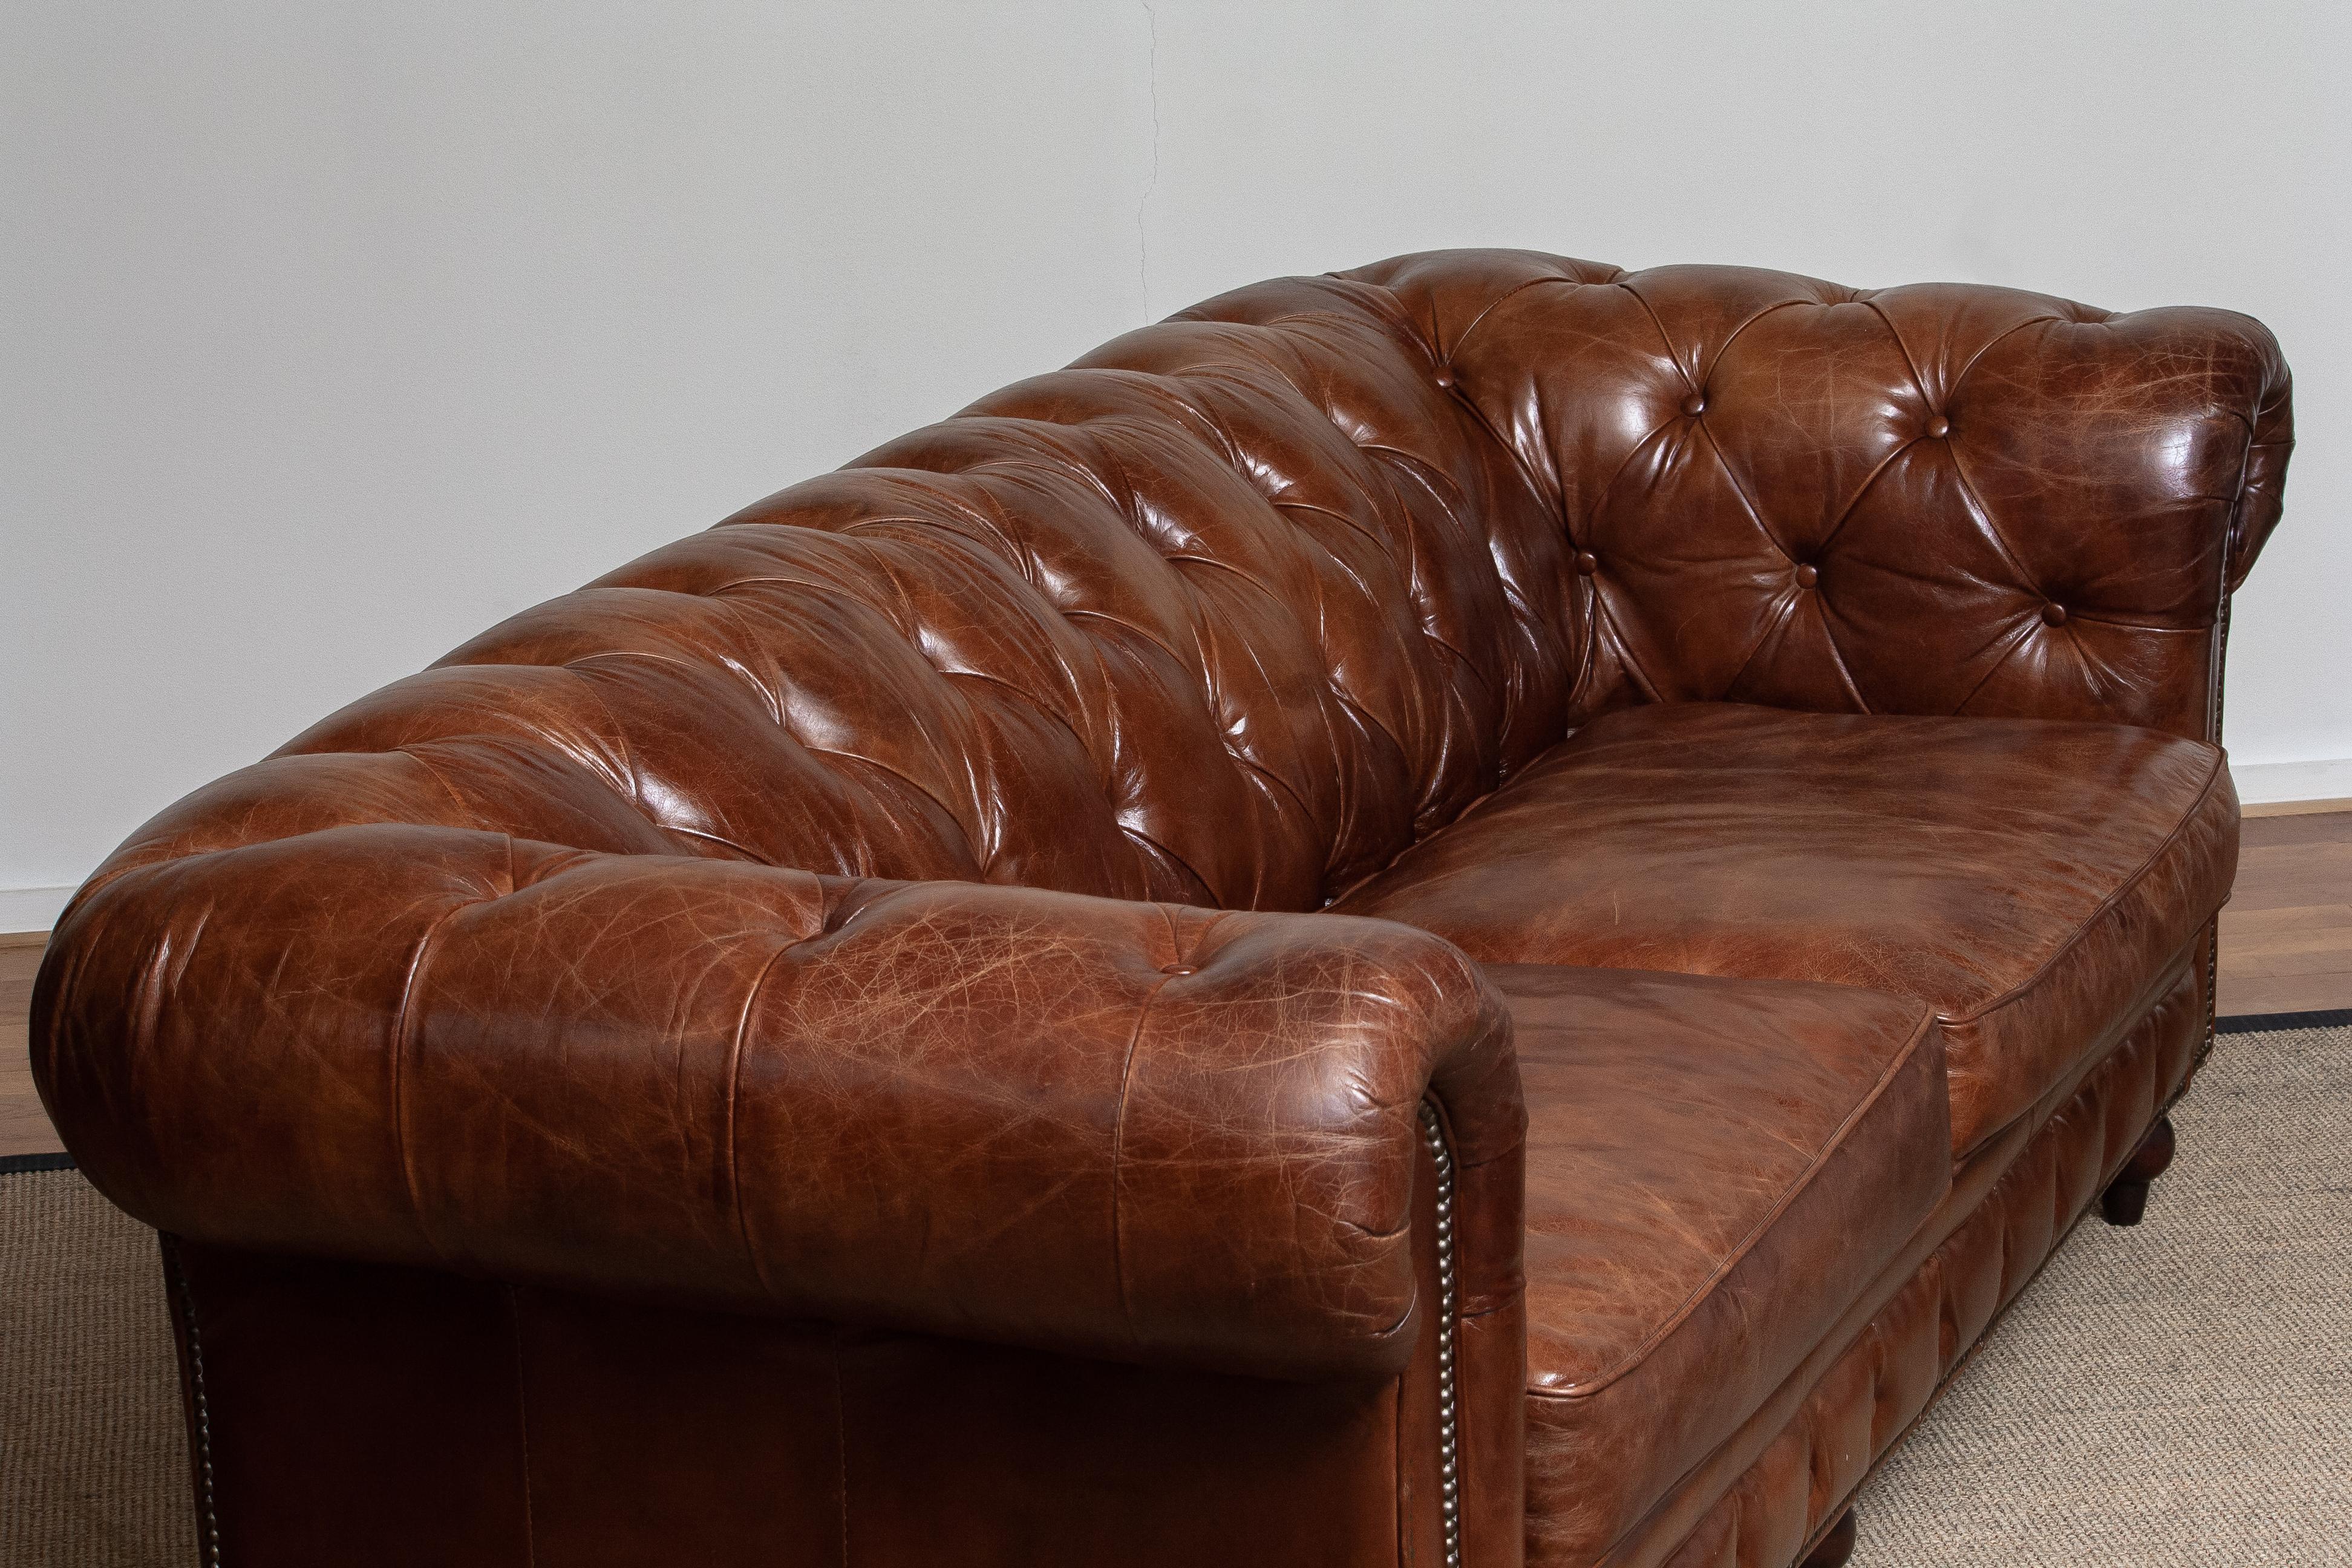 Tufted Brown Leather Chesterfield Sofa and Arm / Lounge Chair 11